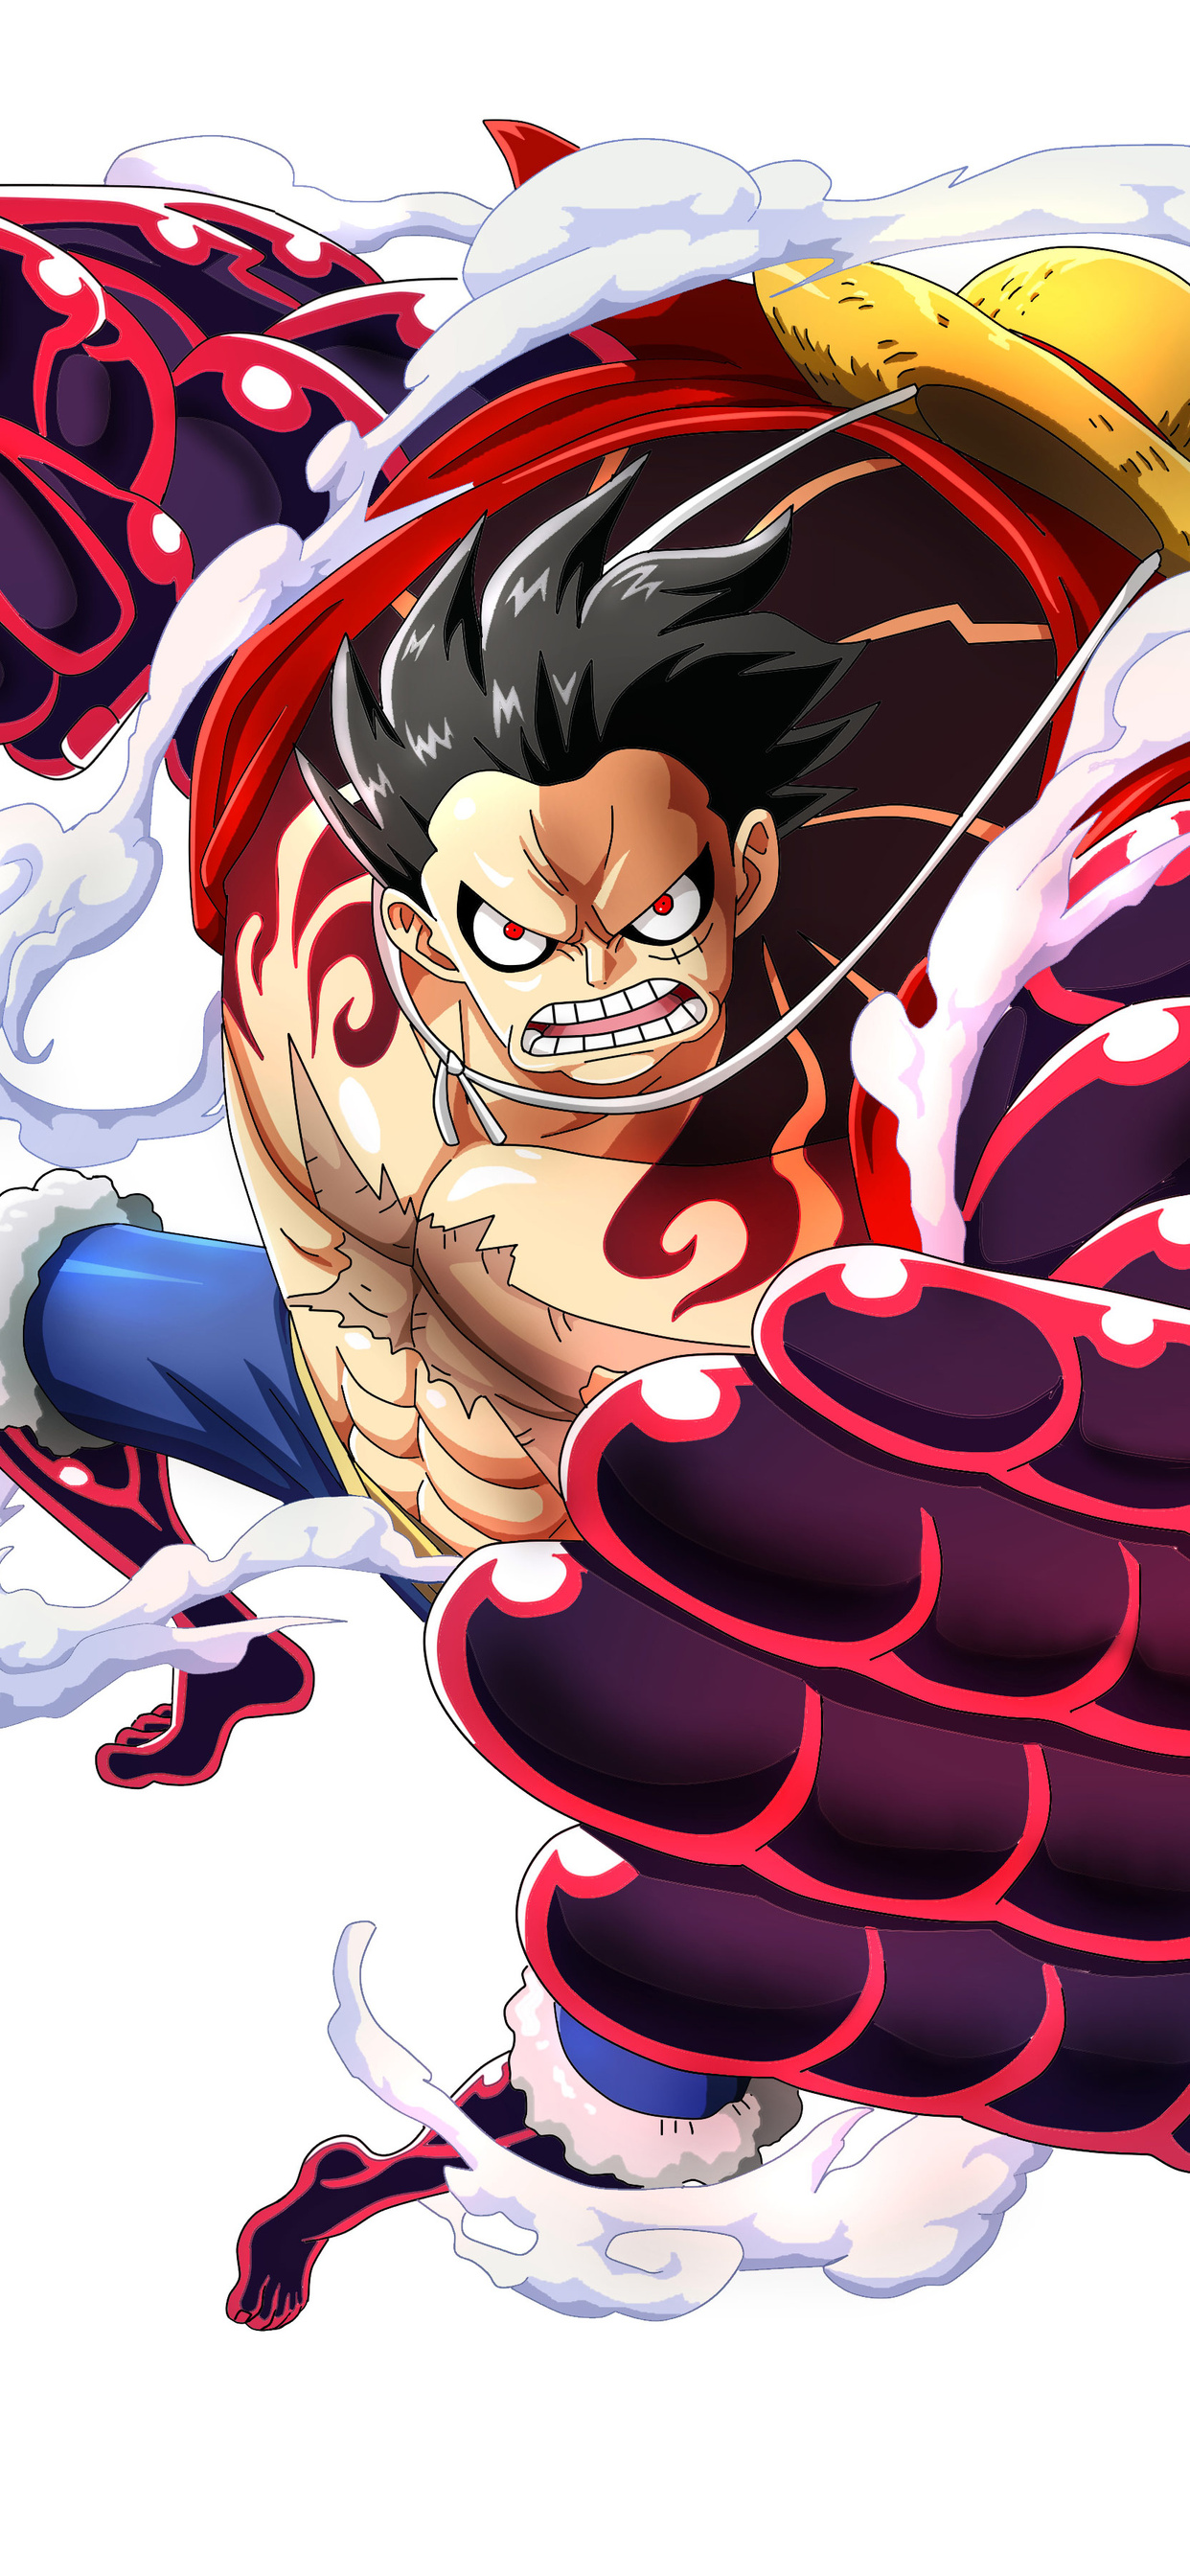 Download One Piece 4k Anime Phone Wallpaper | Wallpapers.com